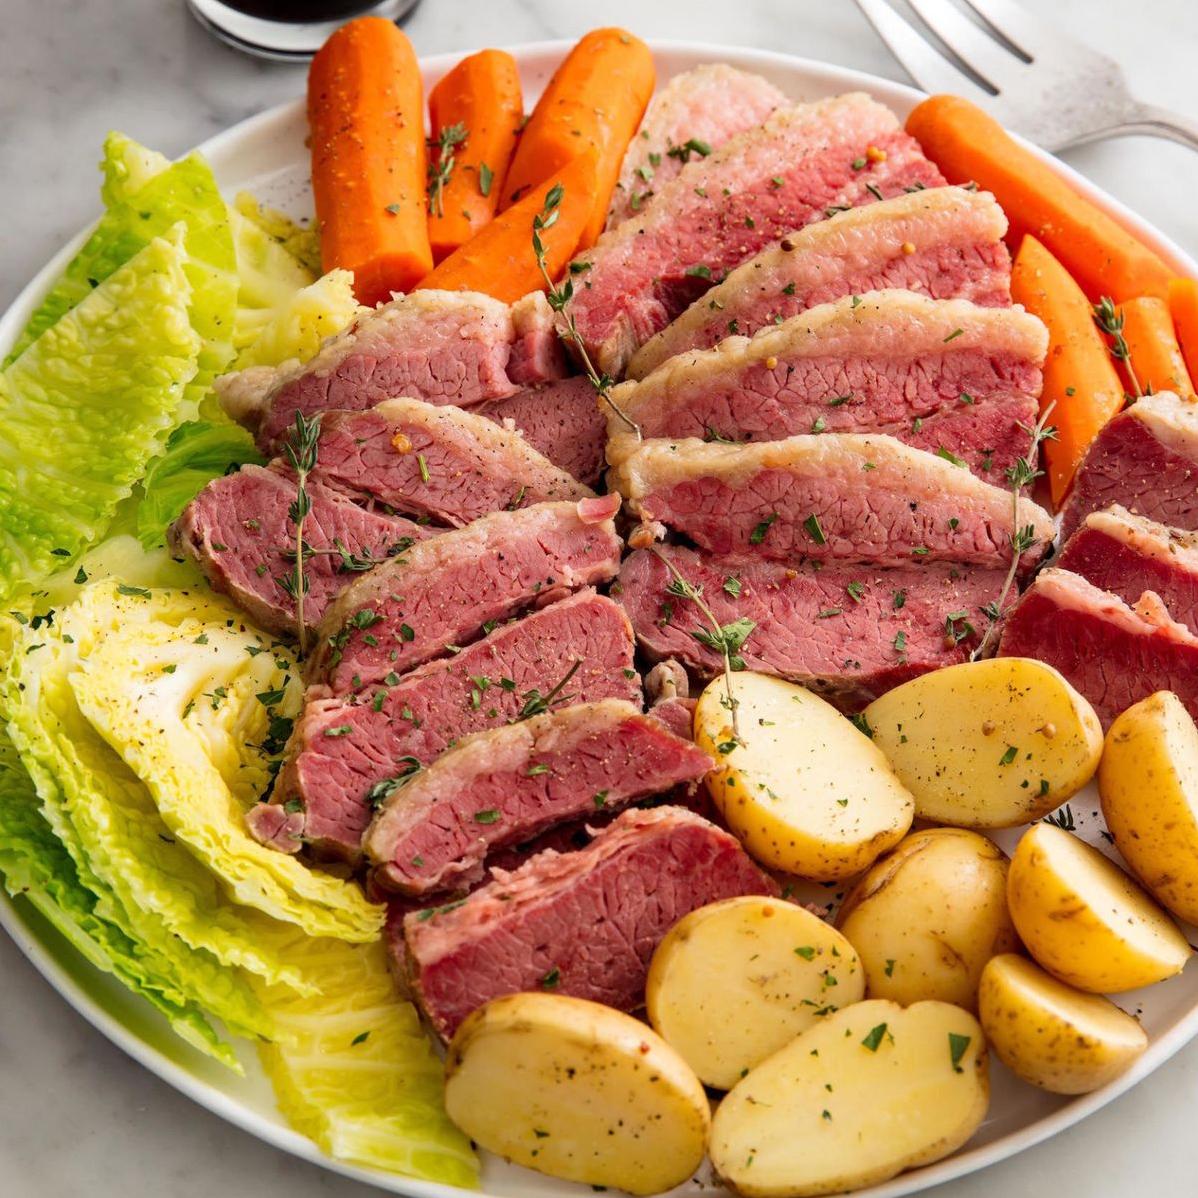 Mouth-watering Corned Beef and Cabbage Recipe – Try it Now!